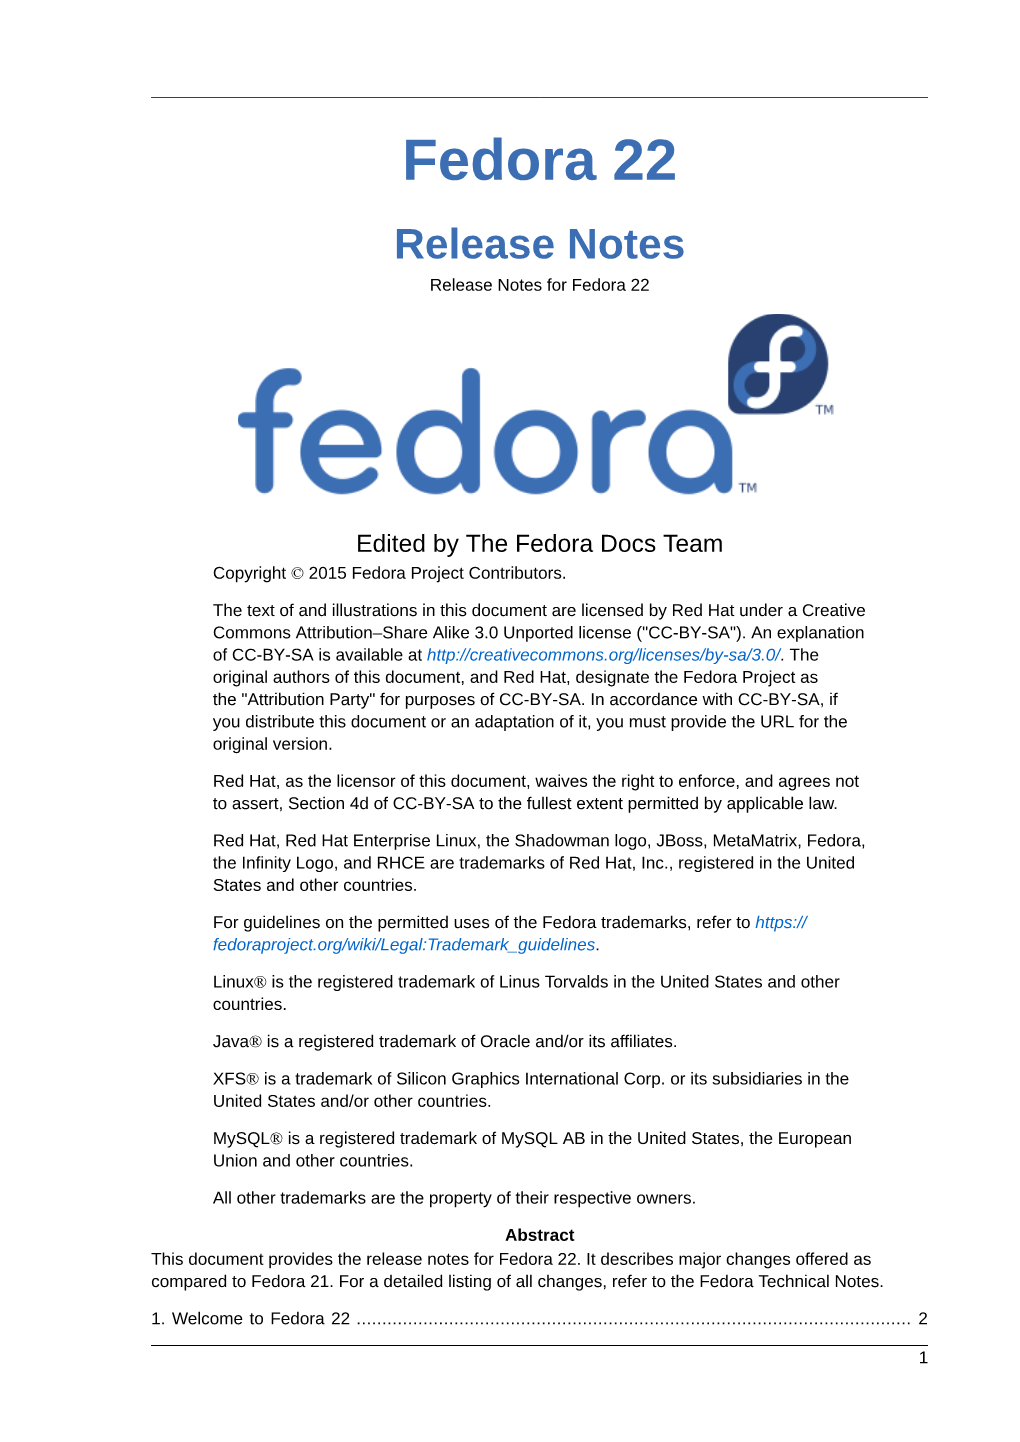 Release Notes for Fedora 22